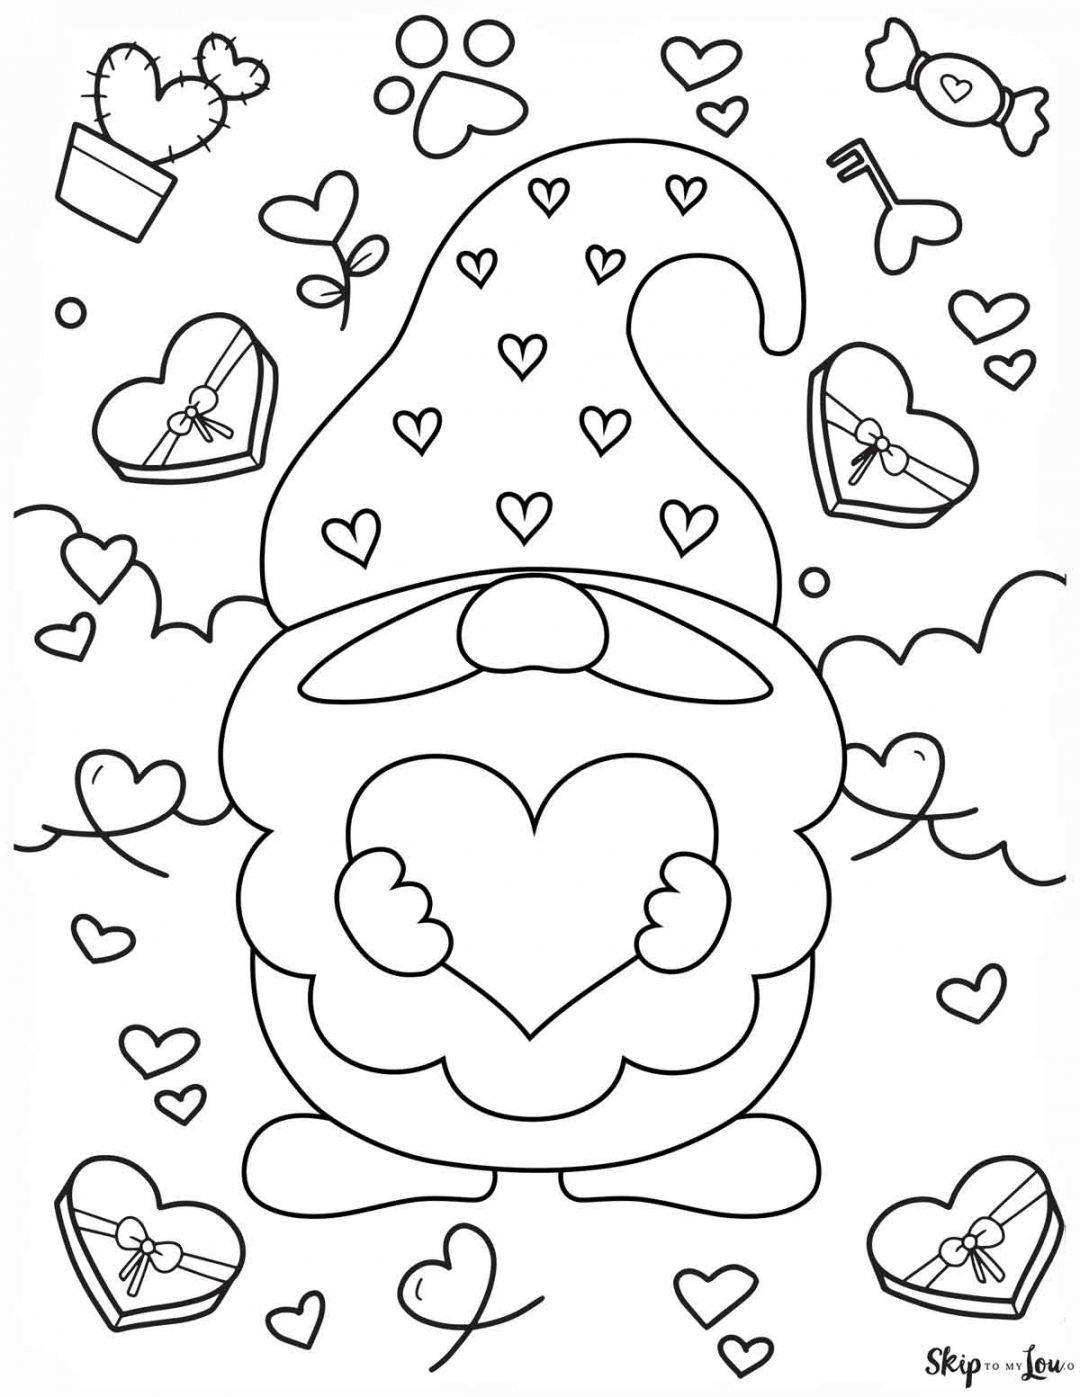 Free Printable Valentines Coloring Pages - Printable - The BEST free Valentines Day Coloring Pages  Skip To My Lou